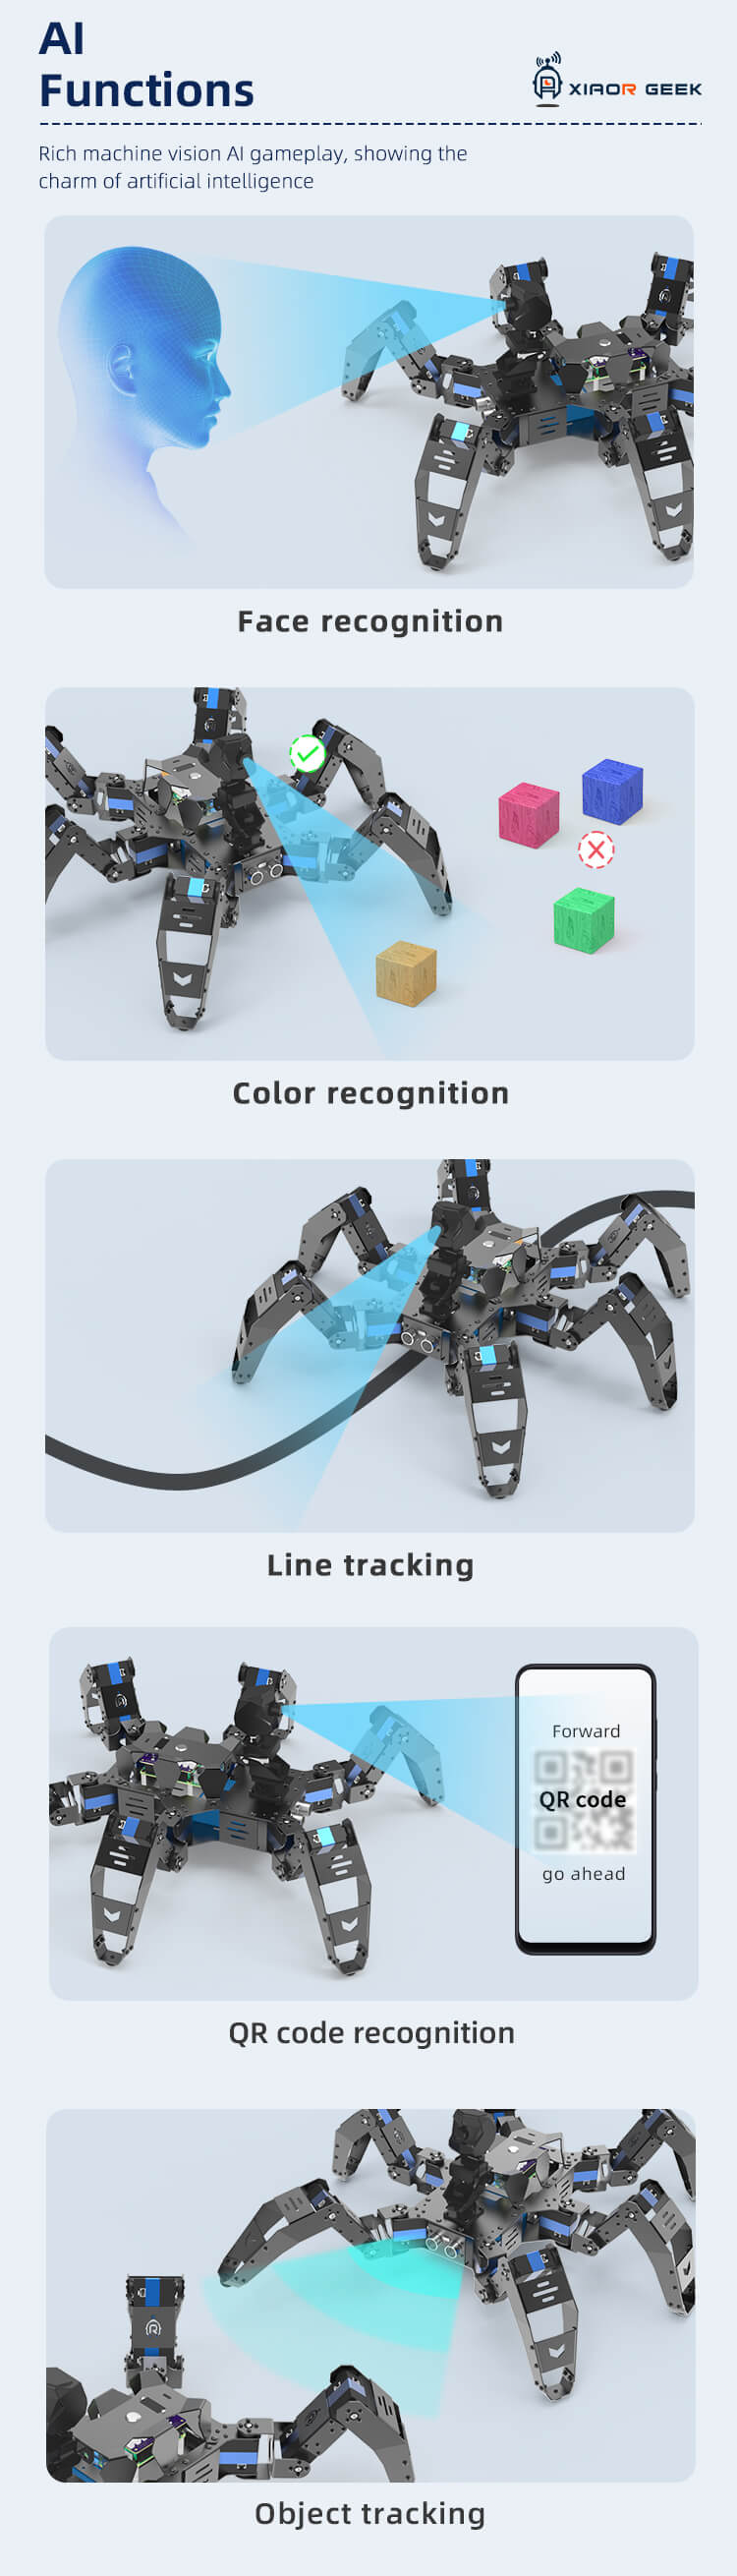 AI functions：face recognition， color recognition，line tracking, QR code recognition，object tracking